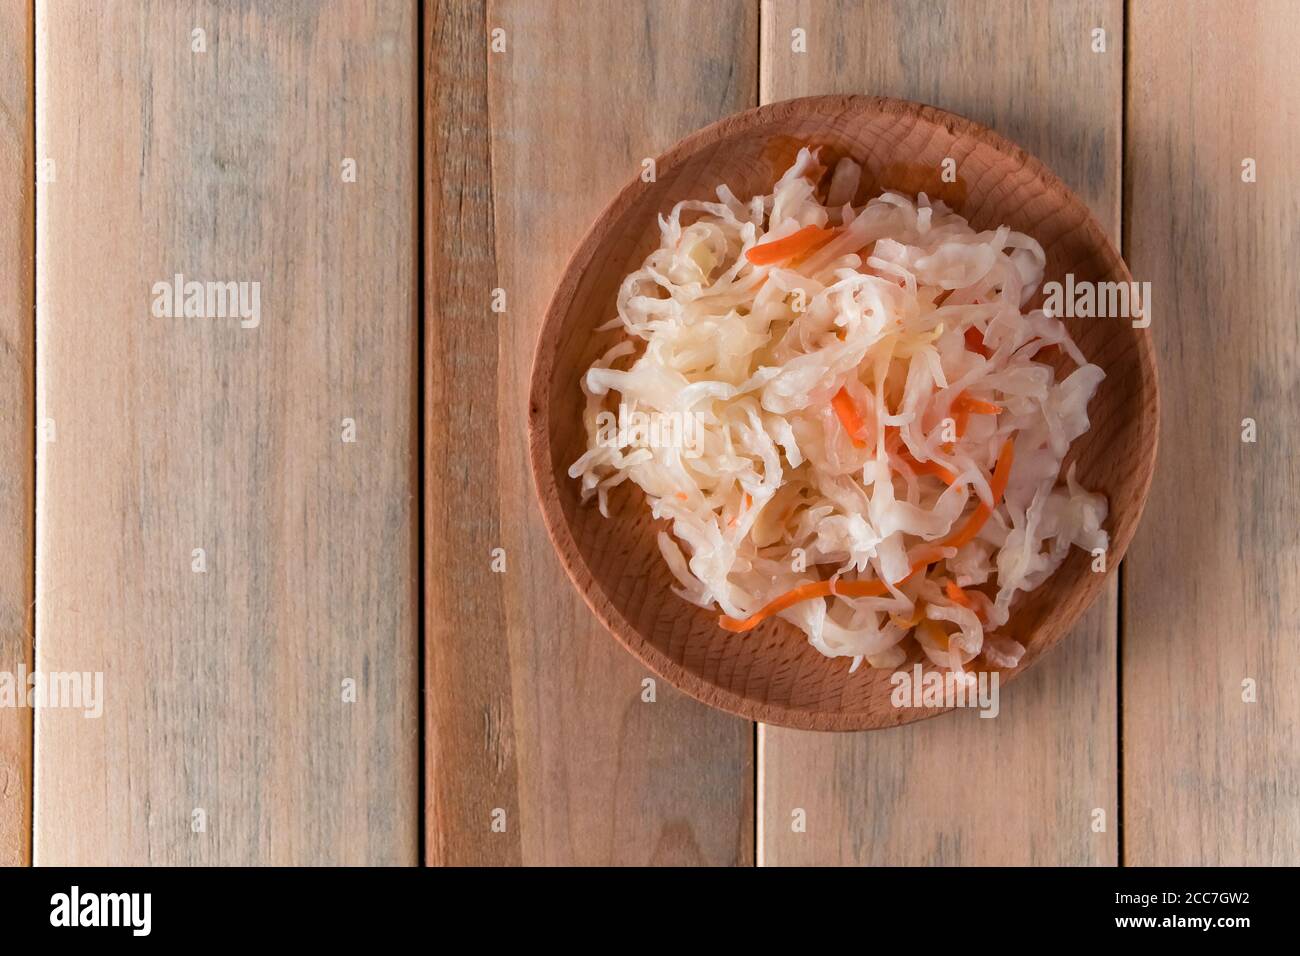 Homemade sauerkraut on a wooden plate. Fermented cabbage with carrot on a light background. Eco food, the trend of healthy eating. Place for your text Stock Photo